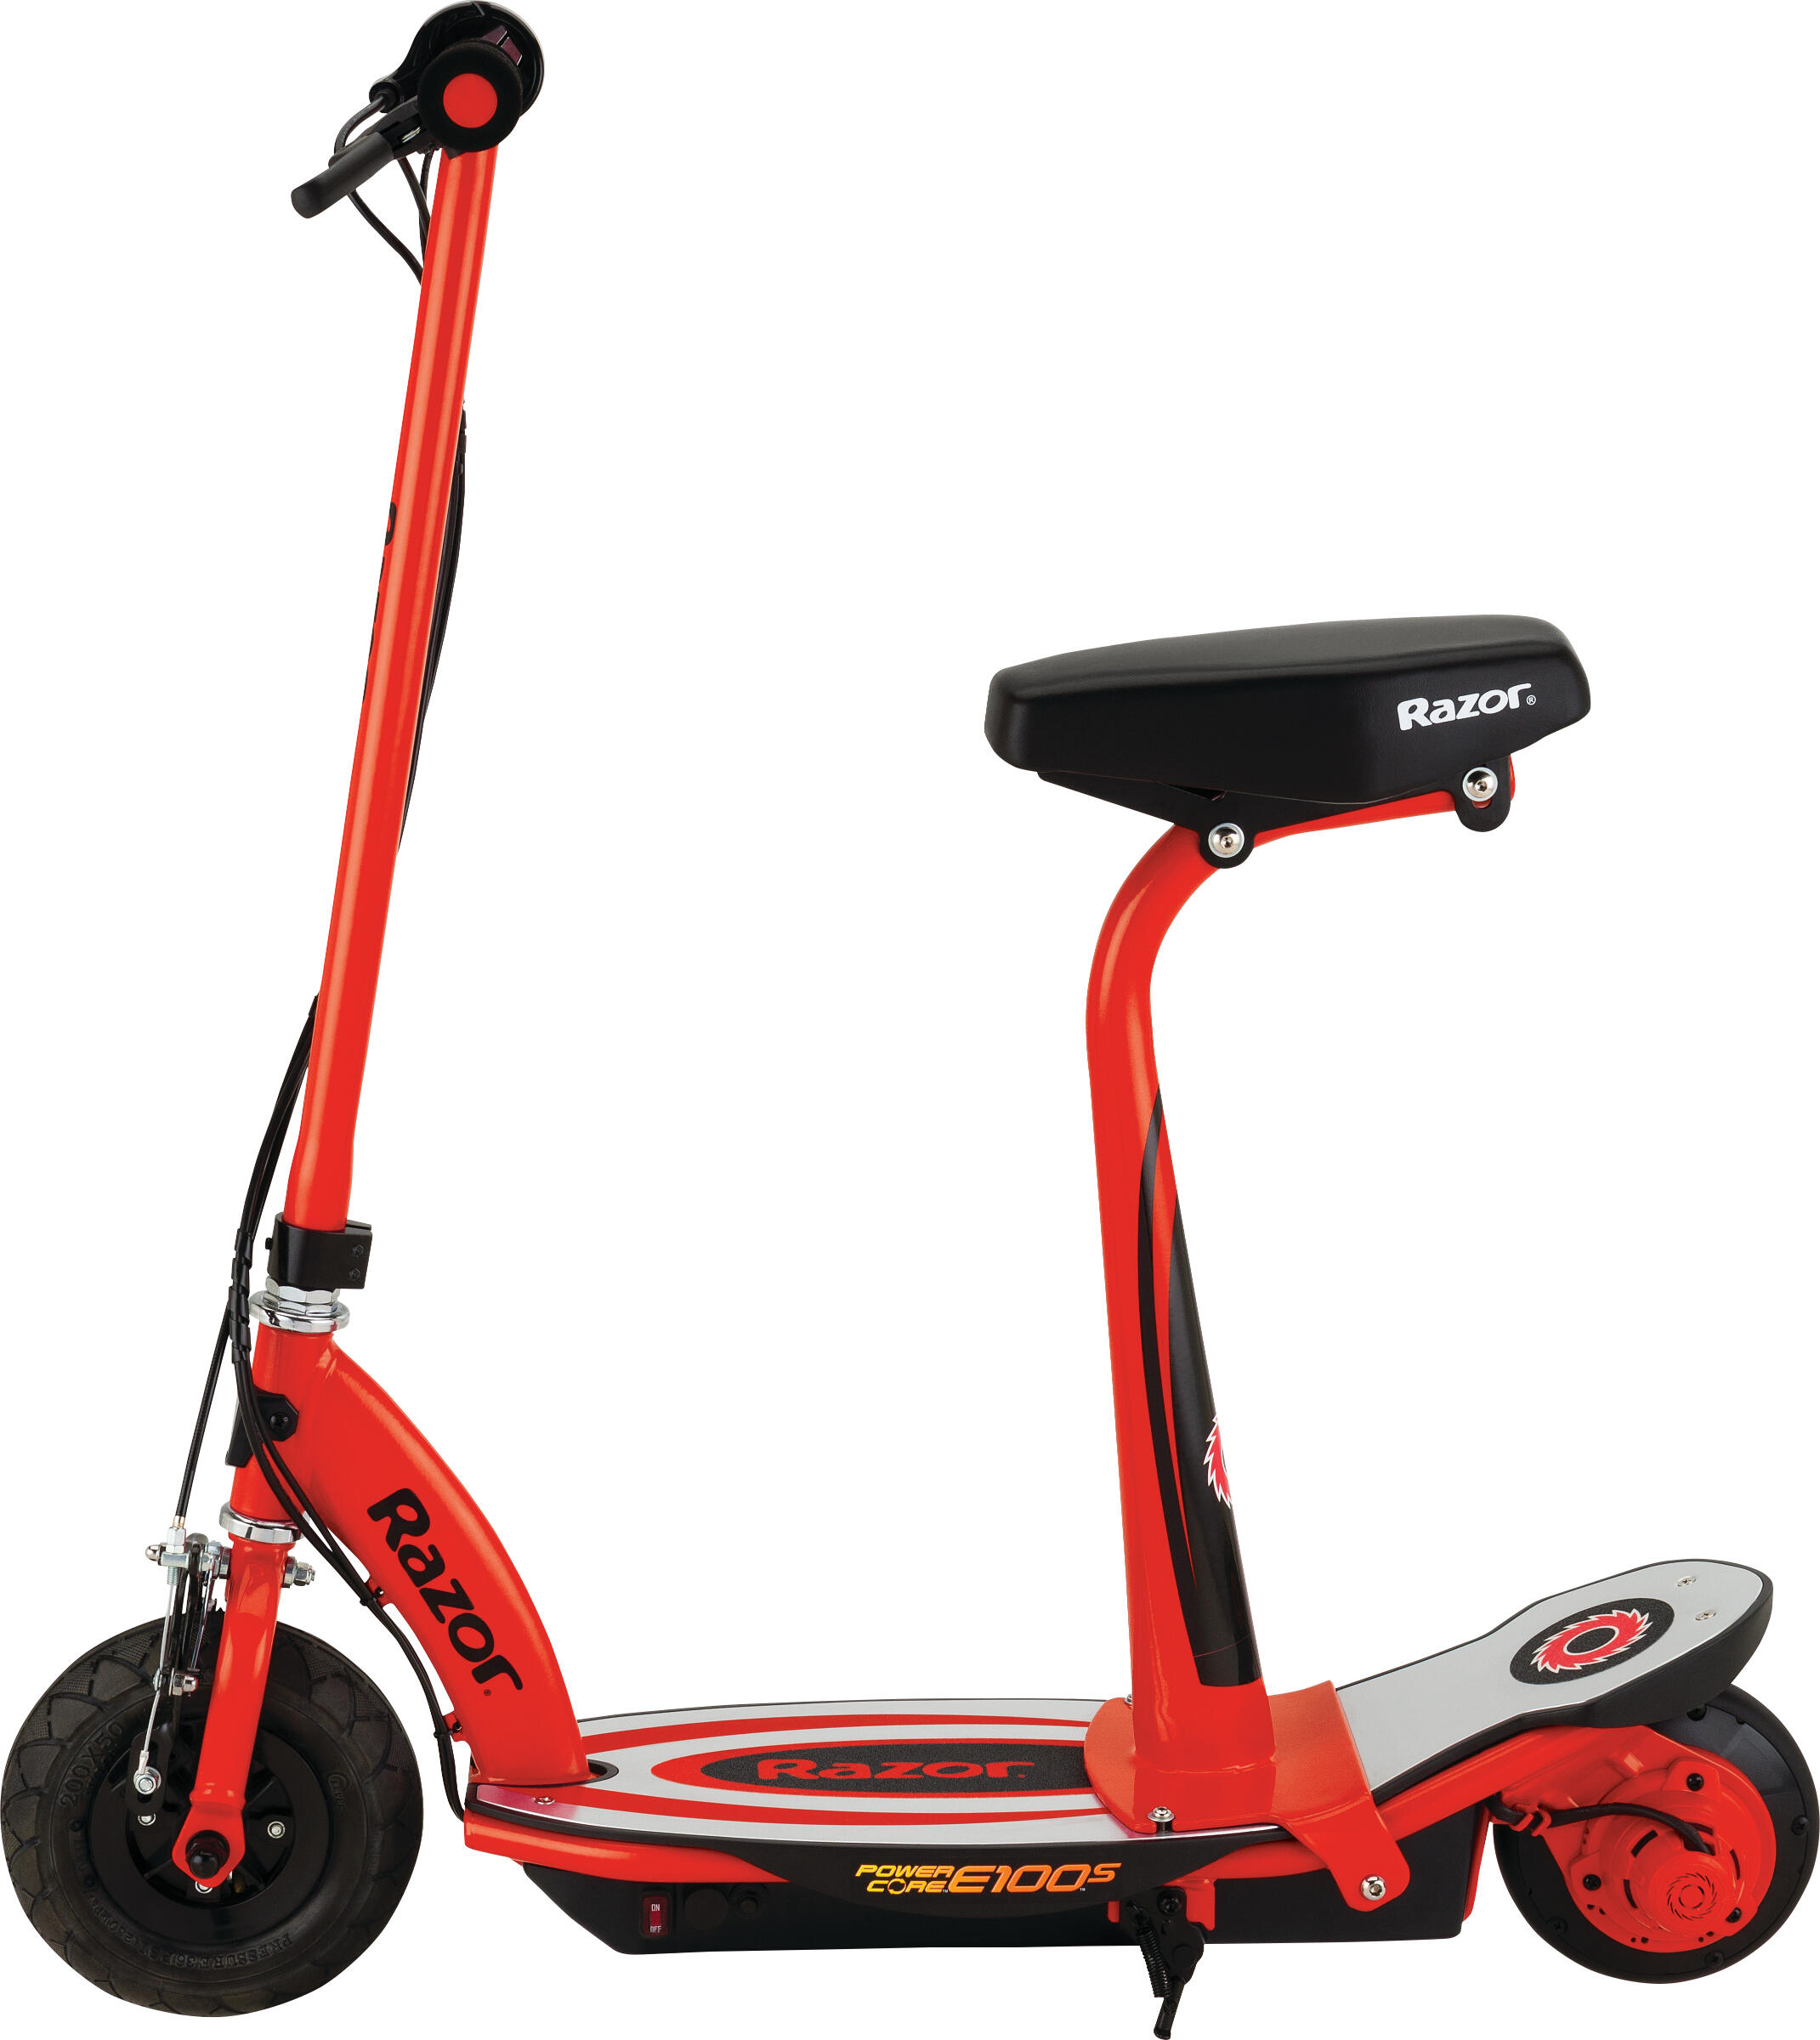 PowerCore E100s Electric Scooter - Red 5/5